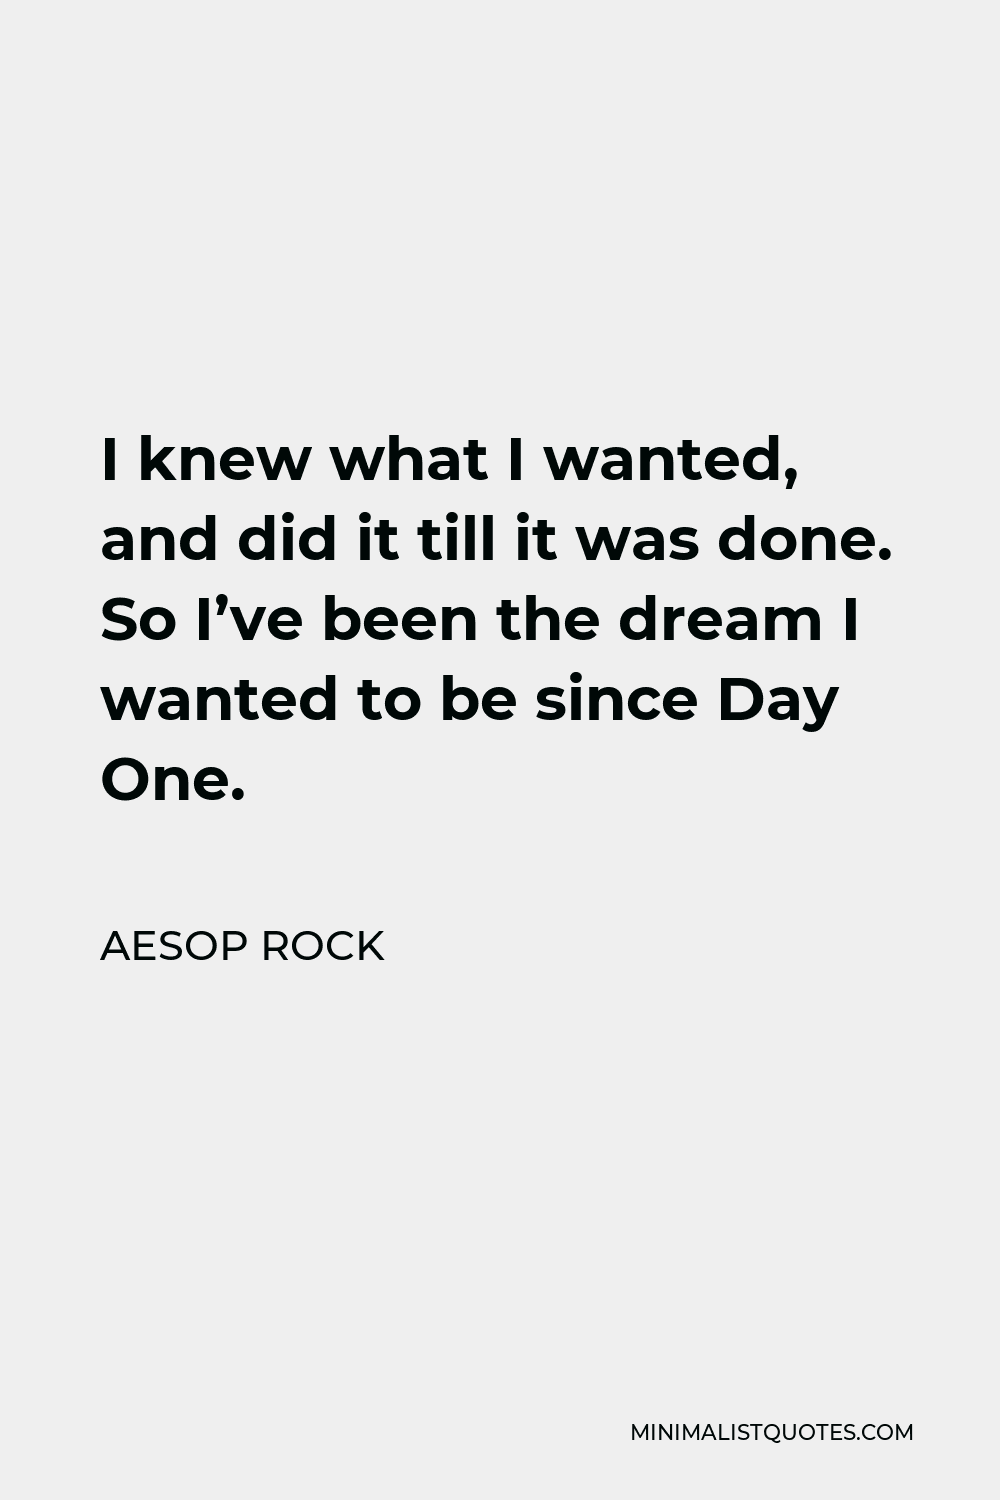 Aesop Rock Quote - I knew what I wanted, and did it till it was done. So I’ve been the dream I wanted to be since Day One.